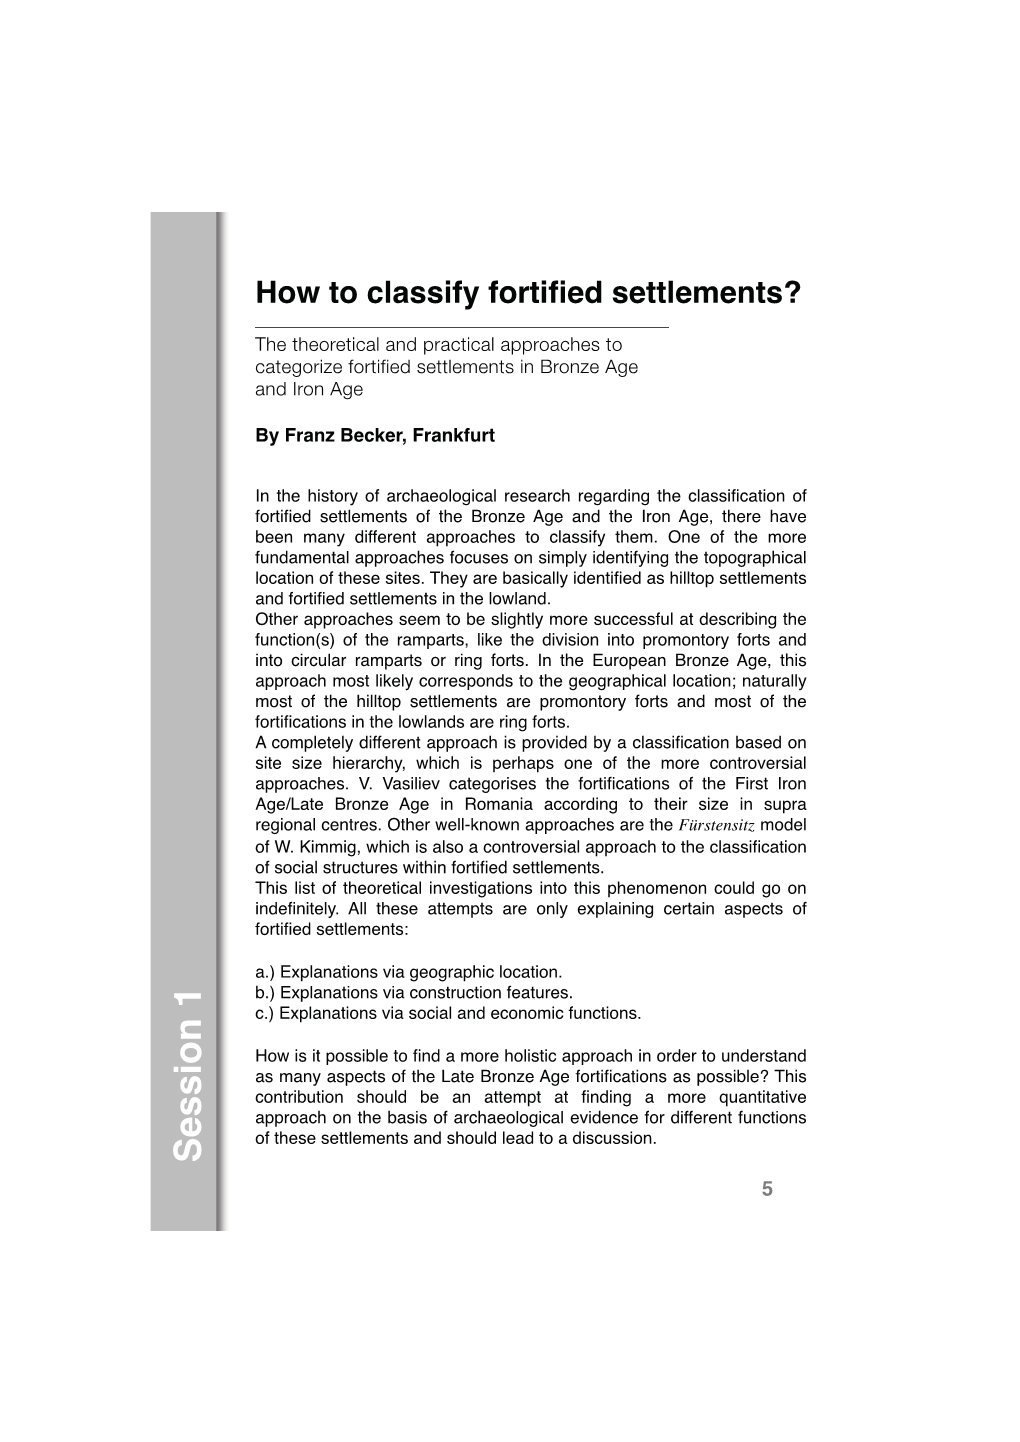 How to Classify Fortified Settlements?